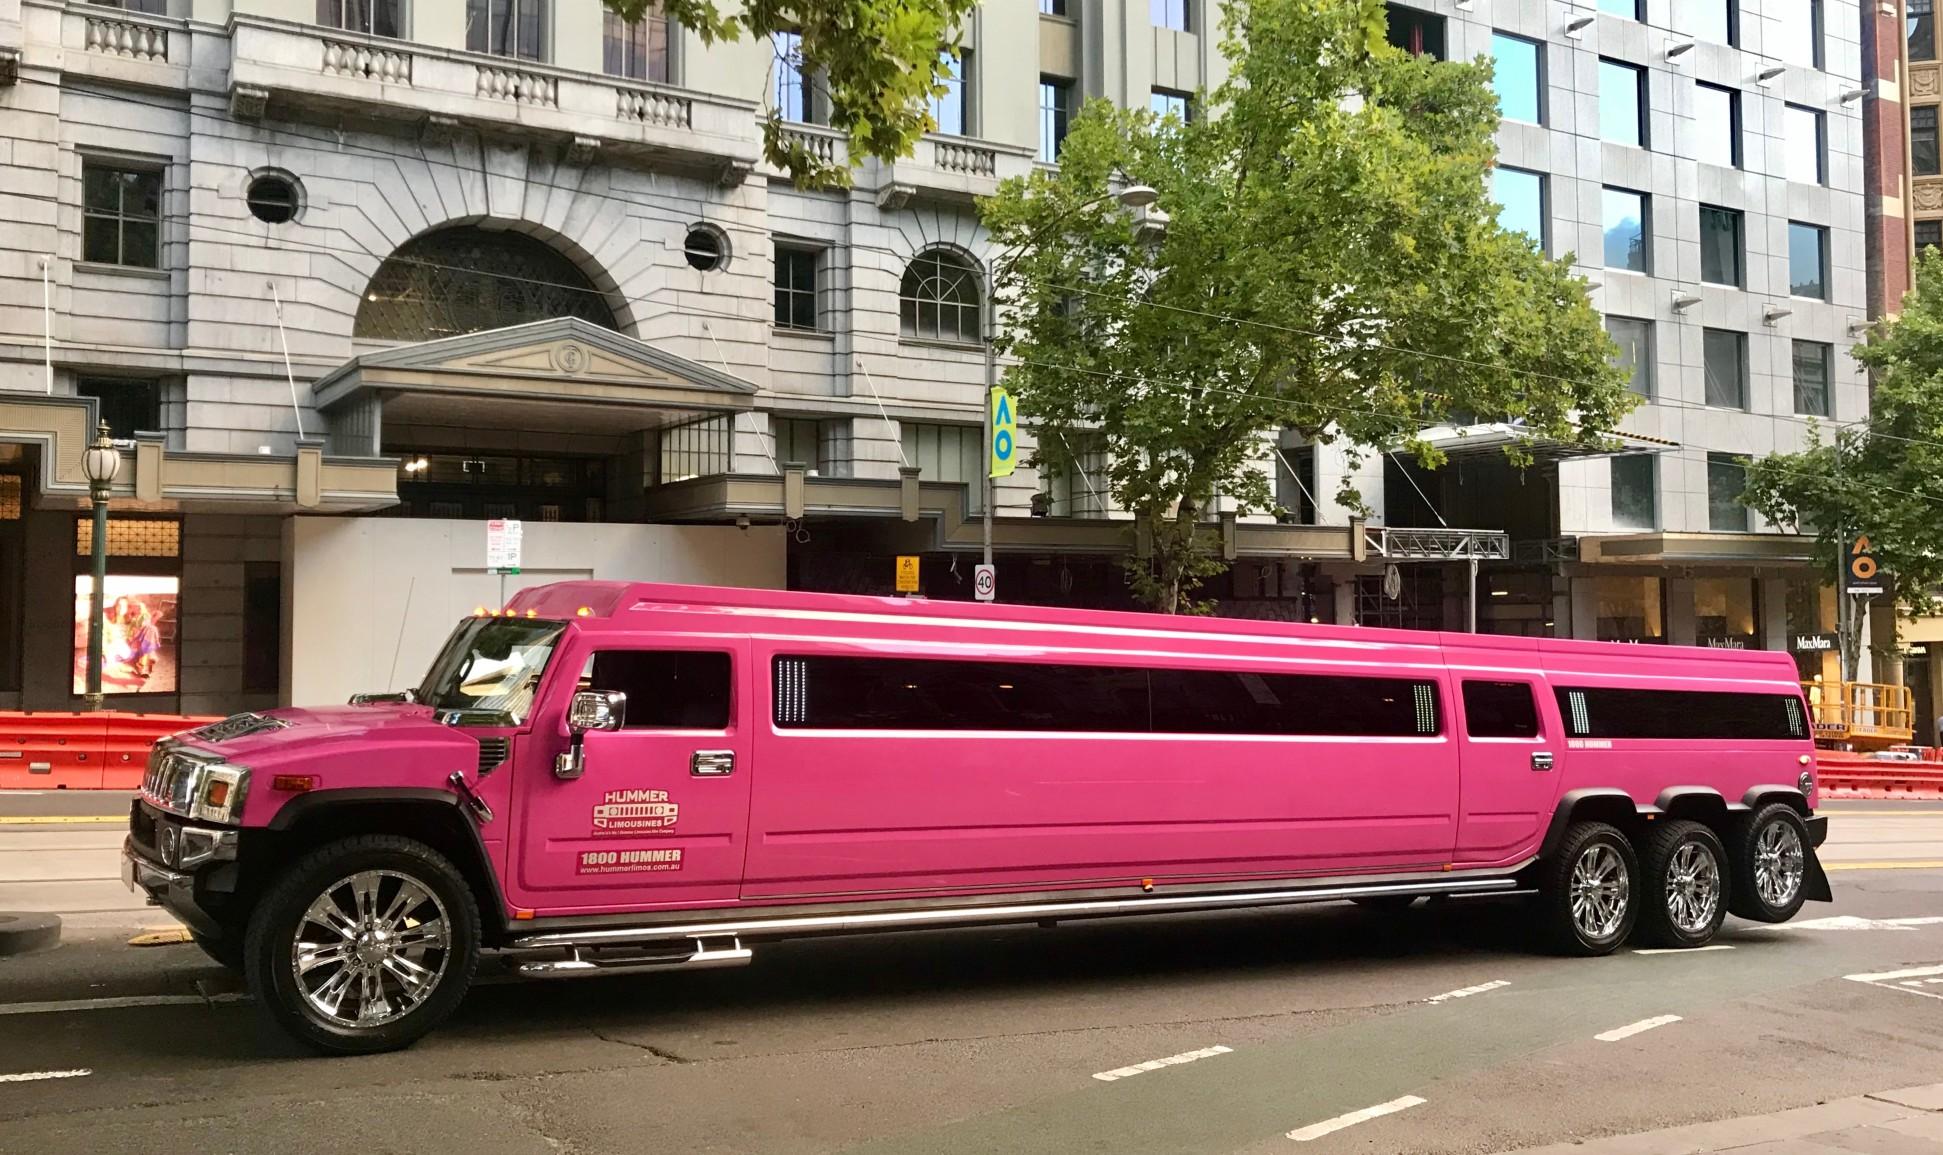 These aren’t your standard limousines.